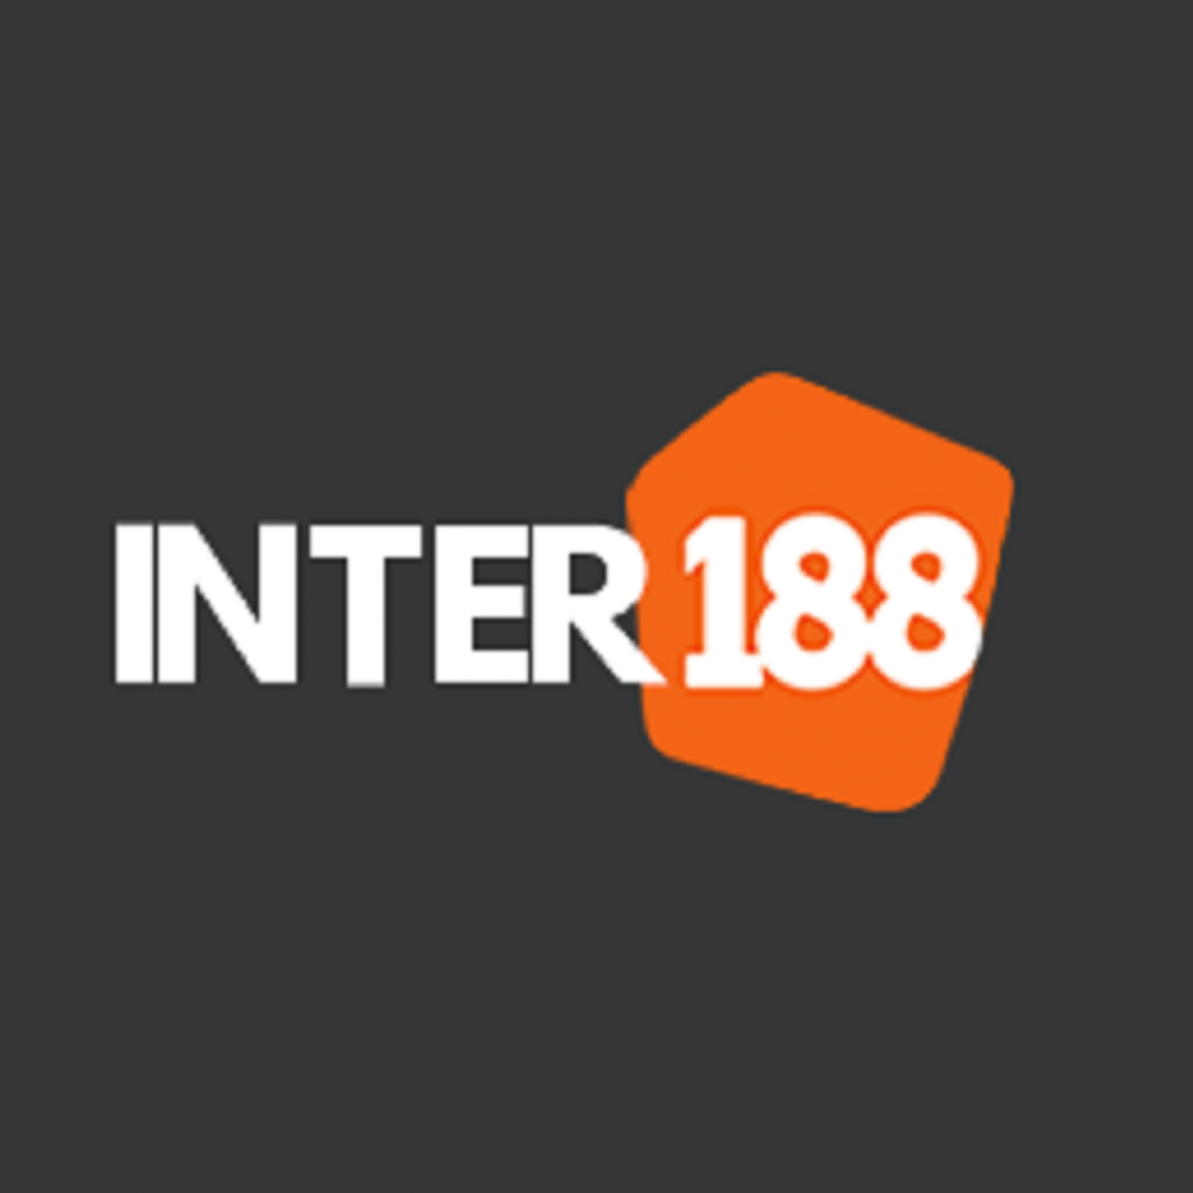 inter188official